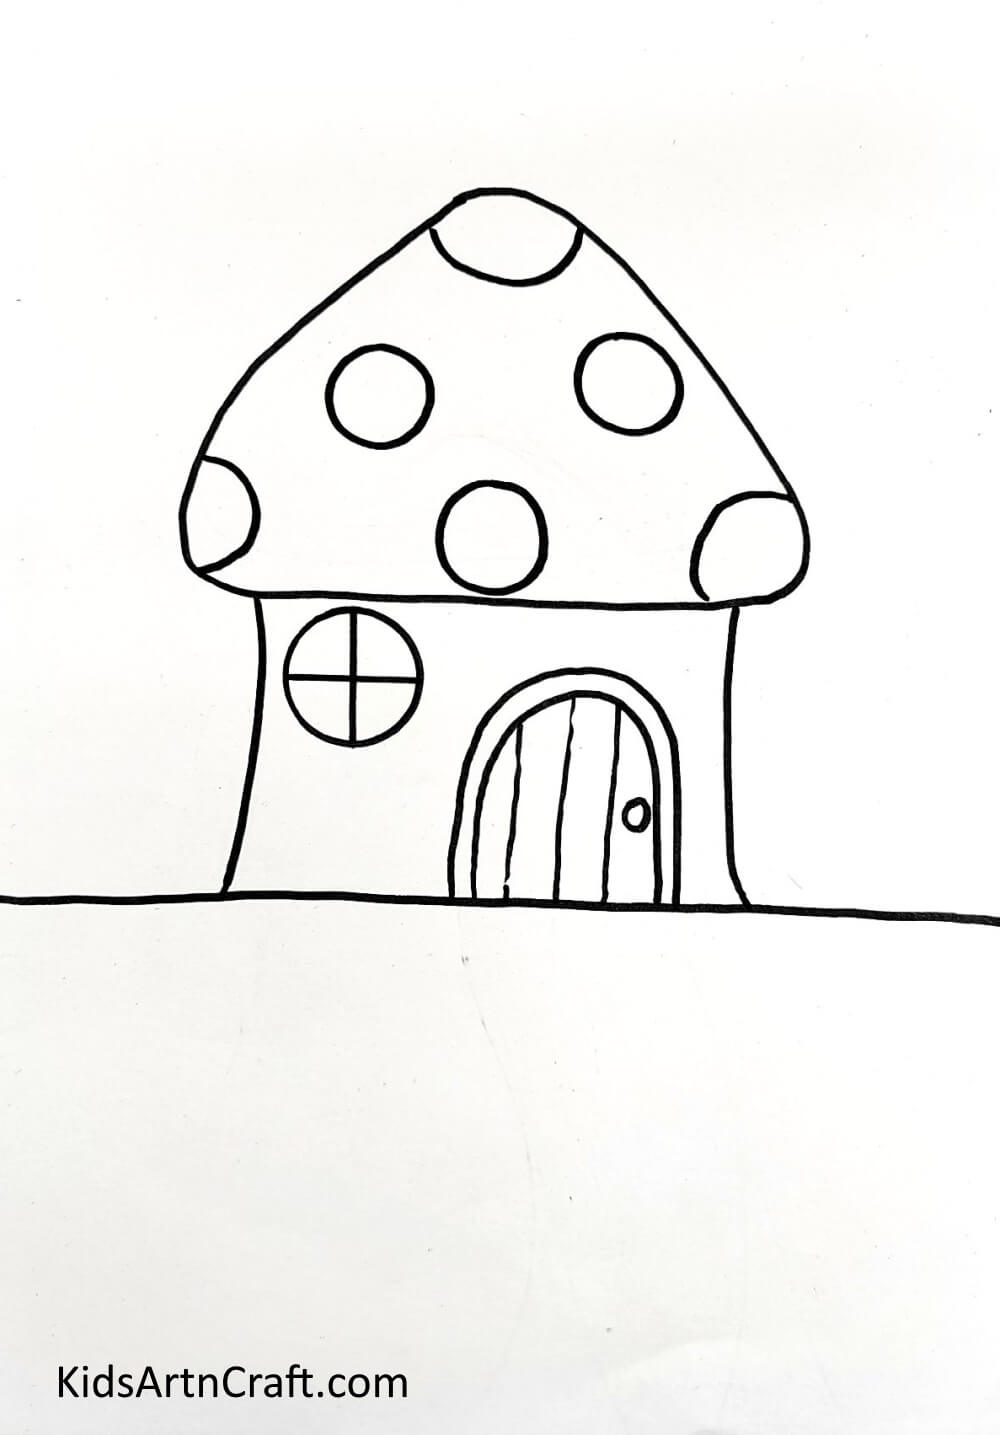 Drawing The Mushroom House - Learn how to Build a Cottage made of Mushrooms